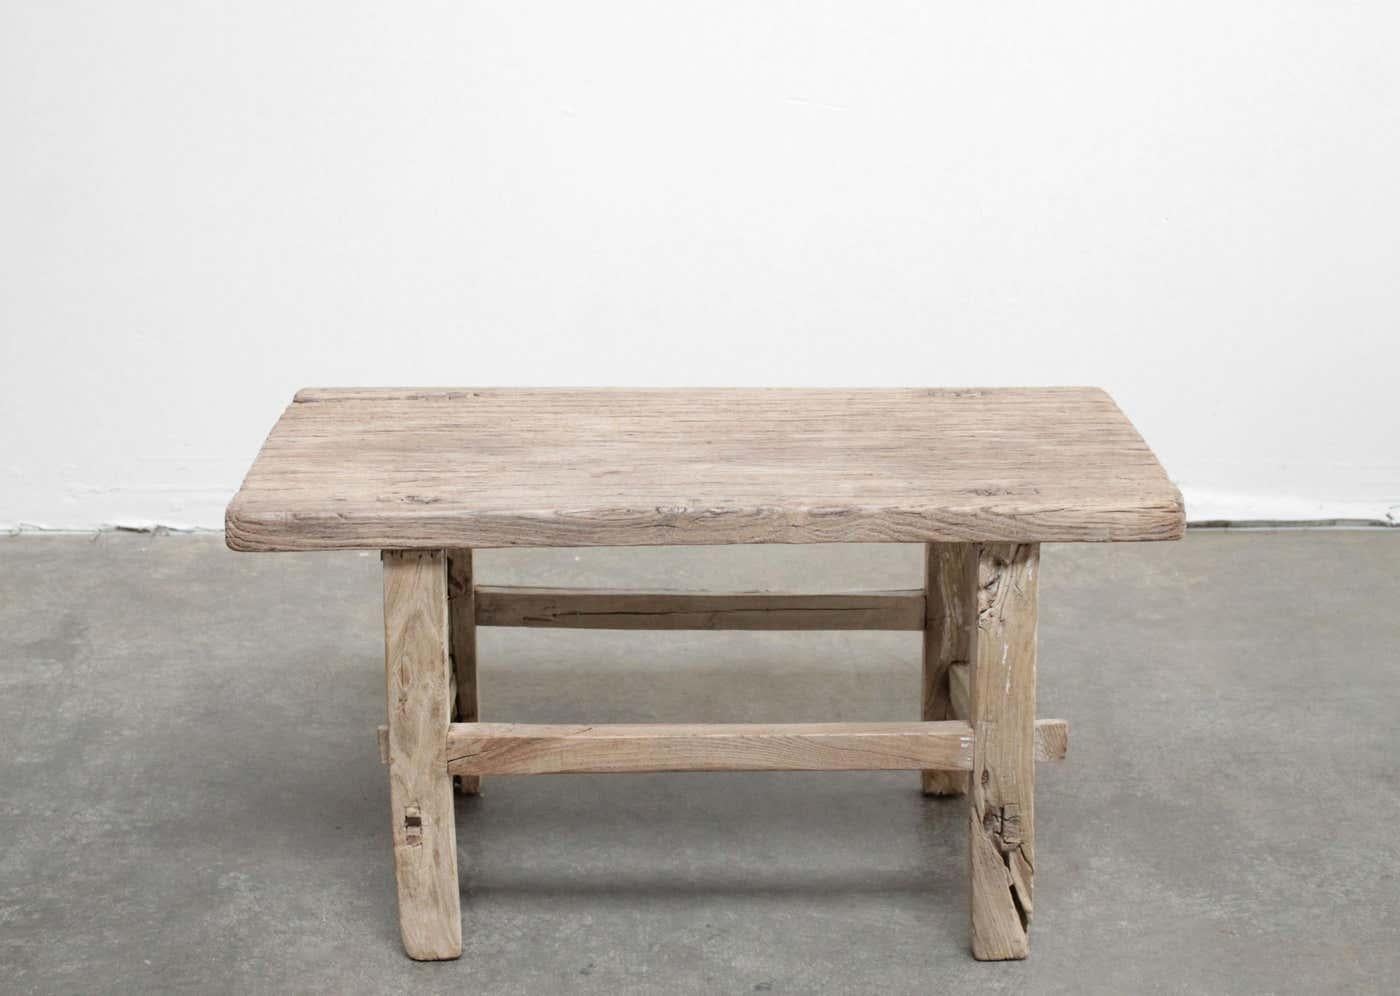 Vintage antique elmwood coffee table with beautiful antique weathered patina top
These are the real vintage antique elmwood coffee table! Beautiful antique patina, with weathering and age, these are solid and sturdy ready for daily use, use as a